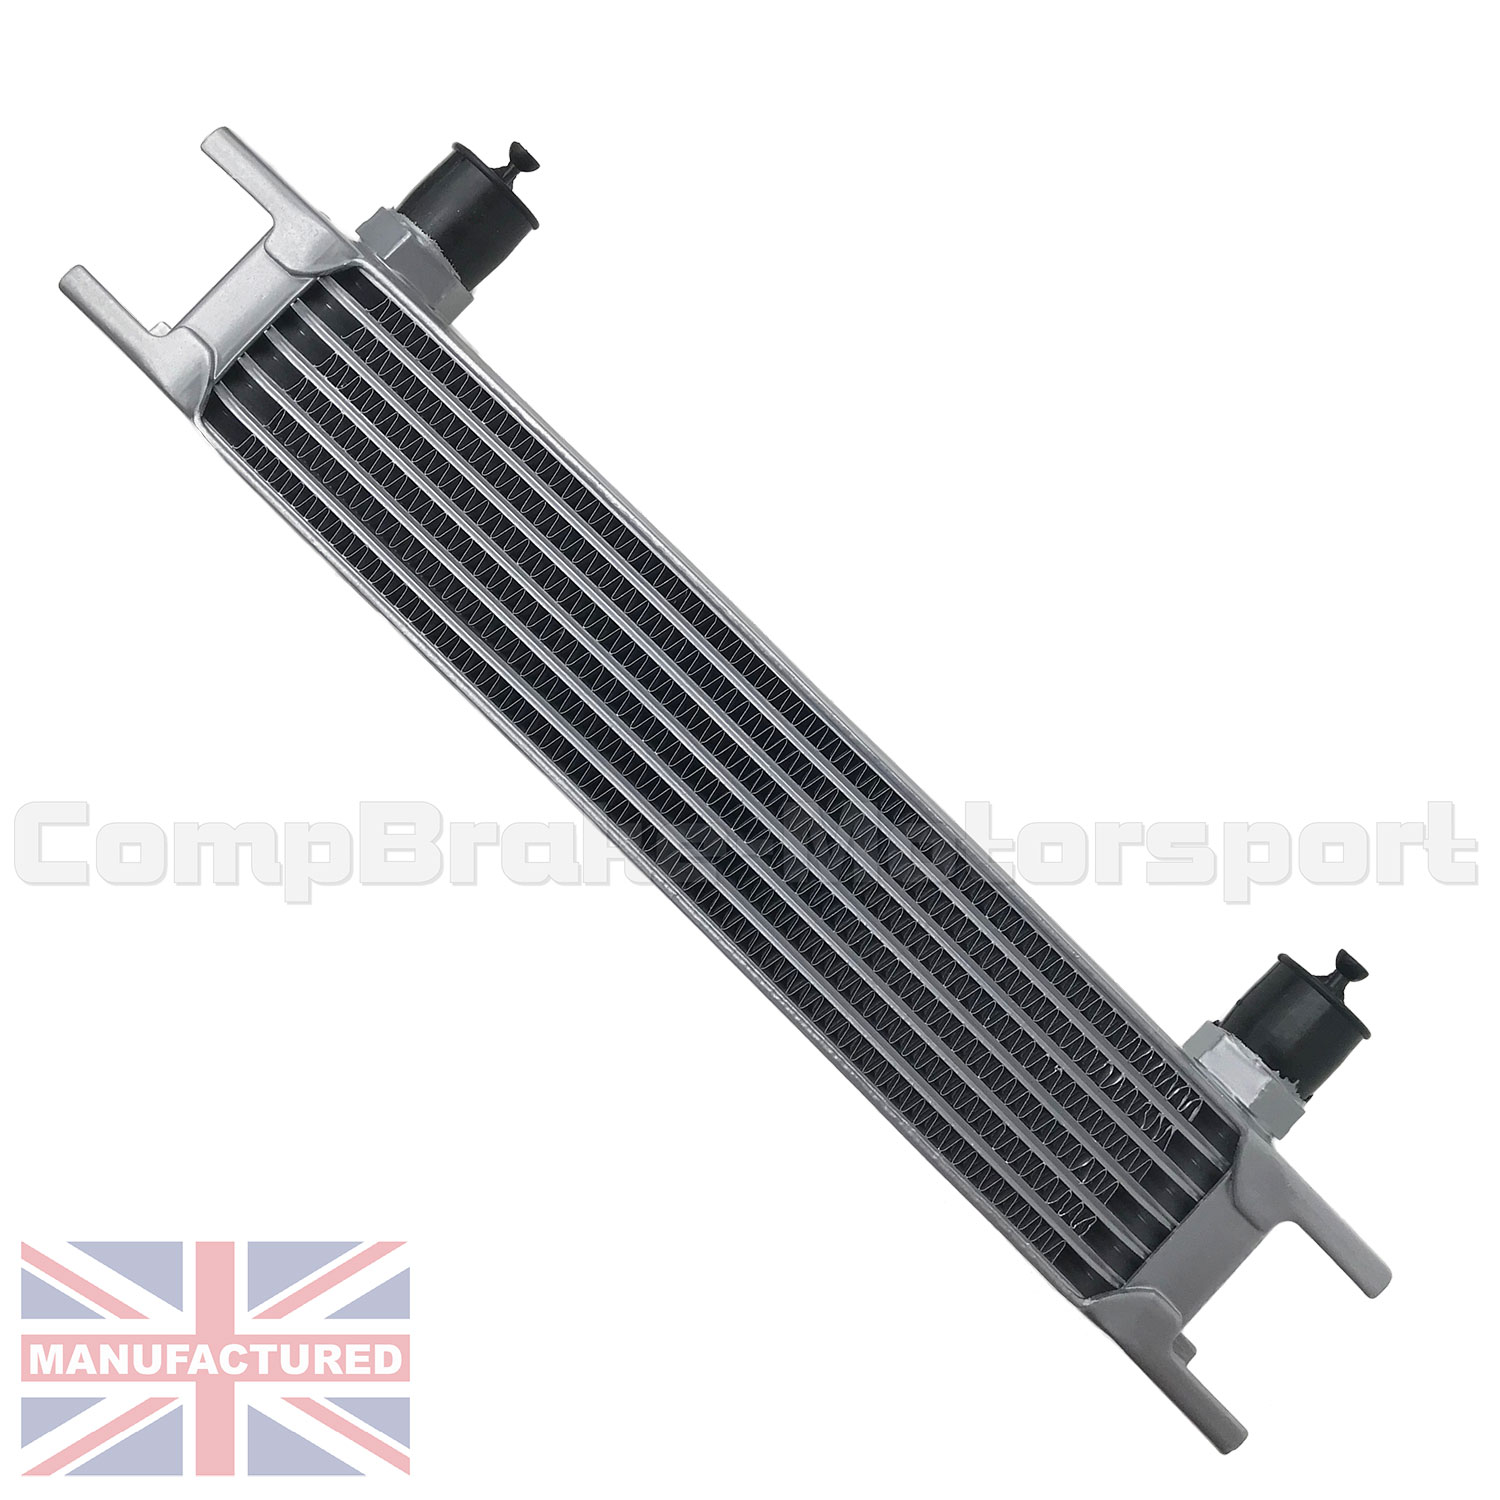 Universal 7 Row AN10 Engine Transmission 248mm Oil Cooler w/ Fittings Kit Silver